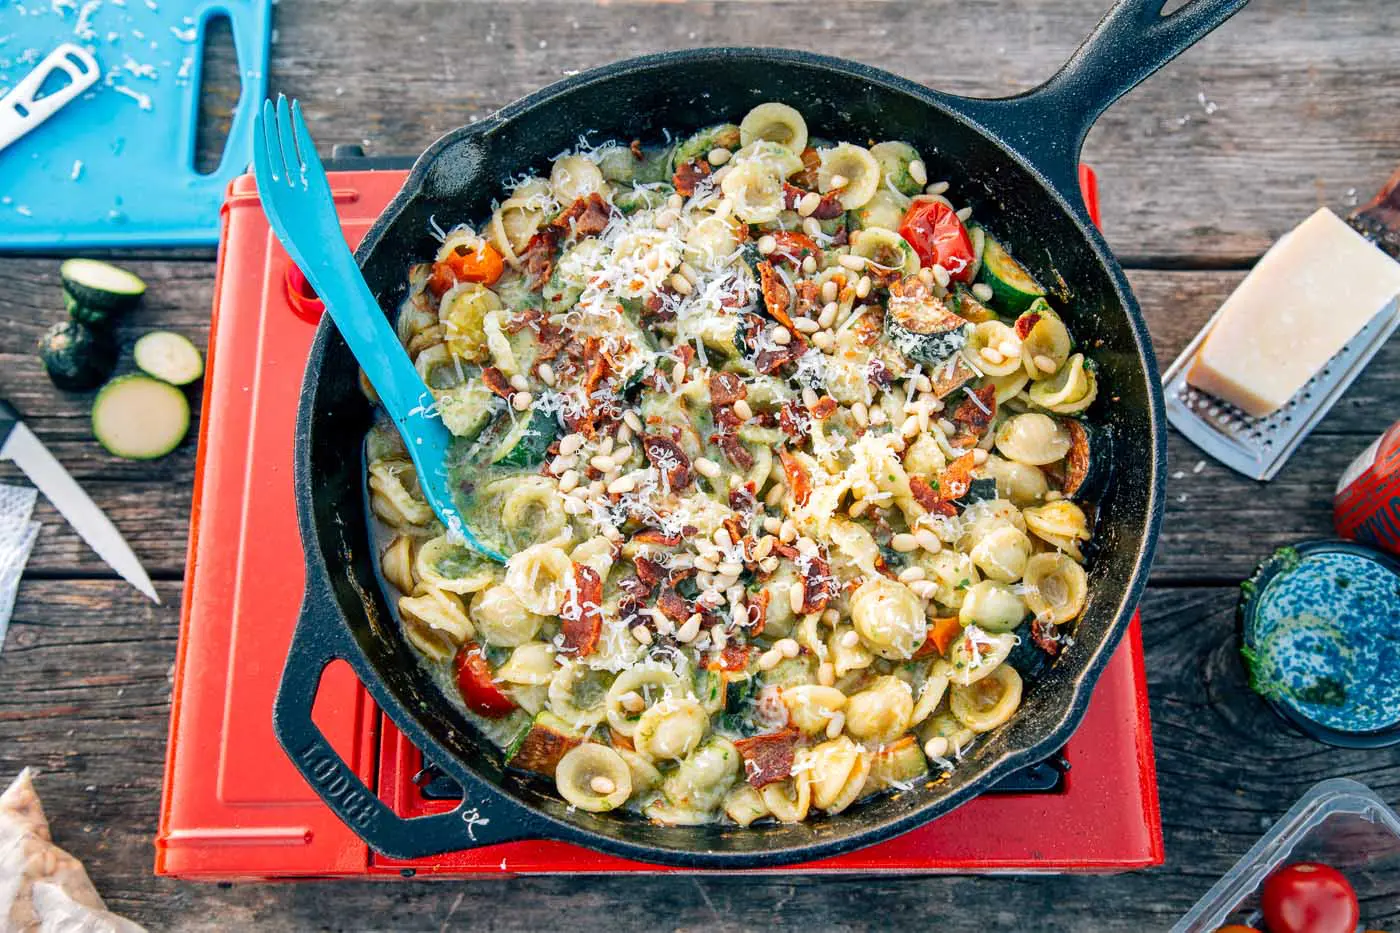 Overhead shot of pesto pasta in a cast iron skillet on a camping stove topped with cheese and pine nuts.